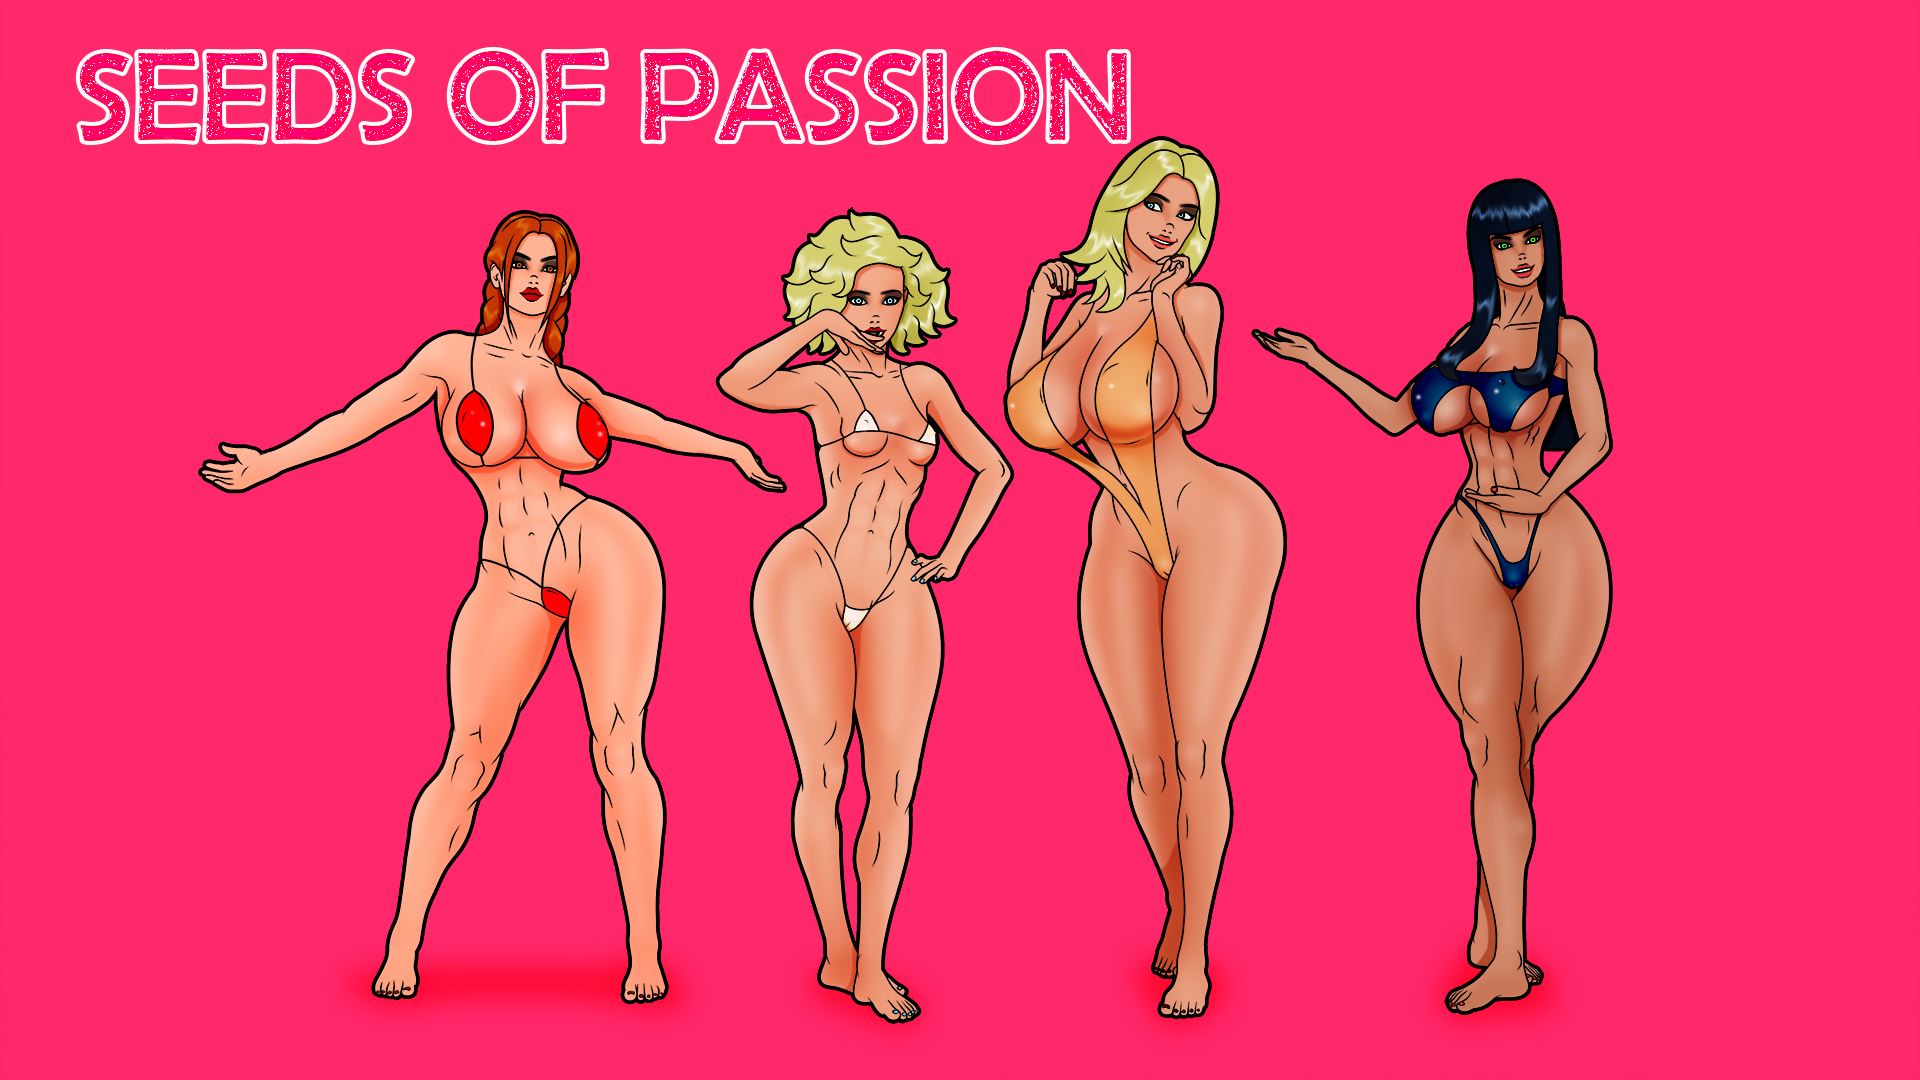 Seeds of Passion RPGM Porn Sex Game v.0.2 Download for Windows, MacOS,  Android